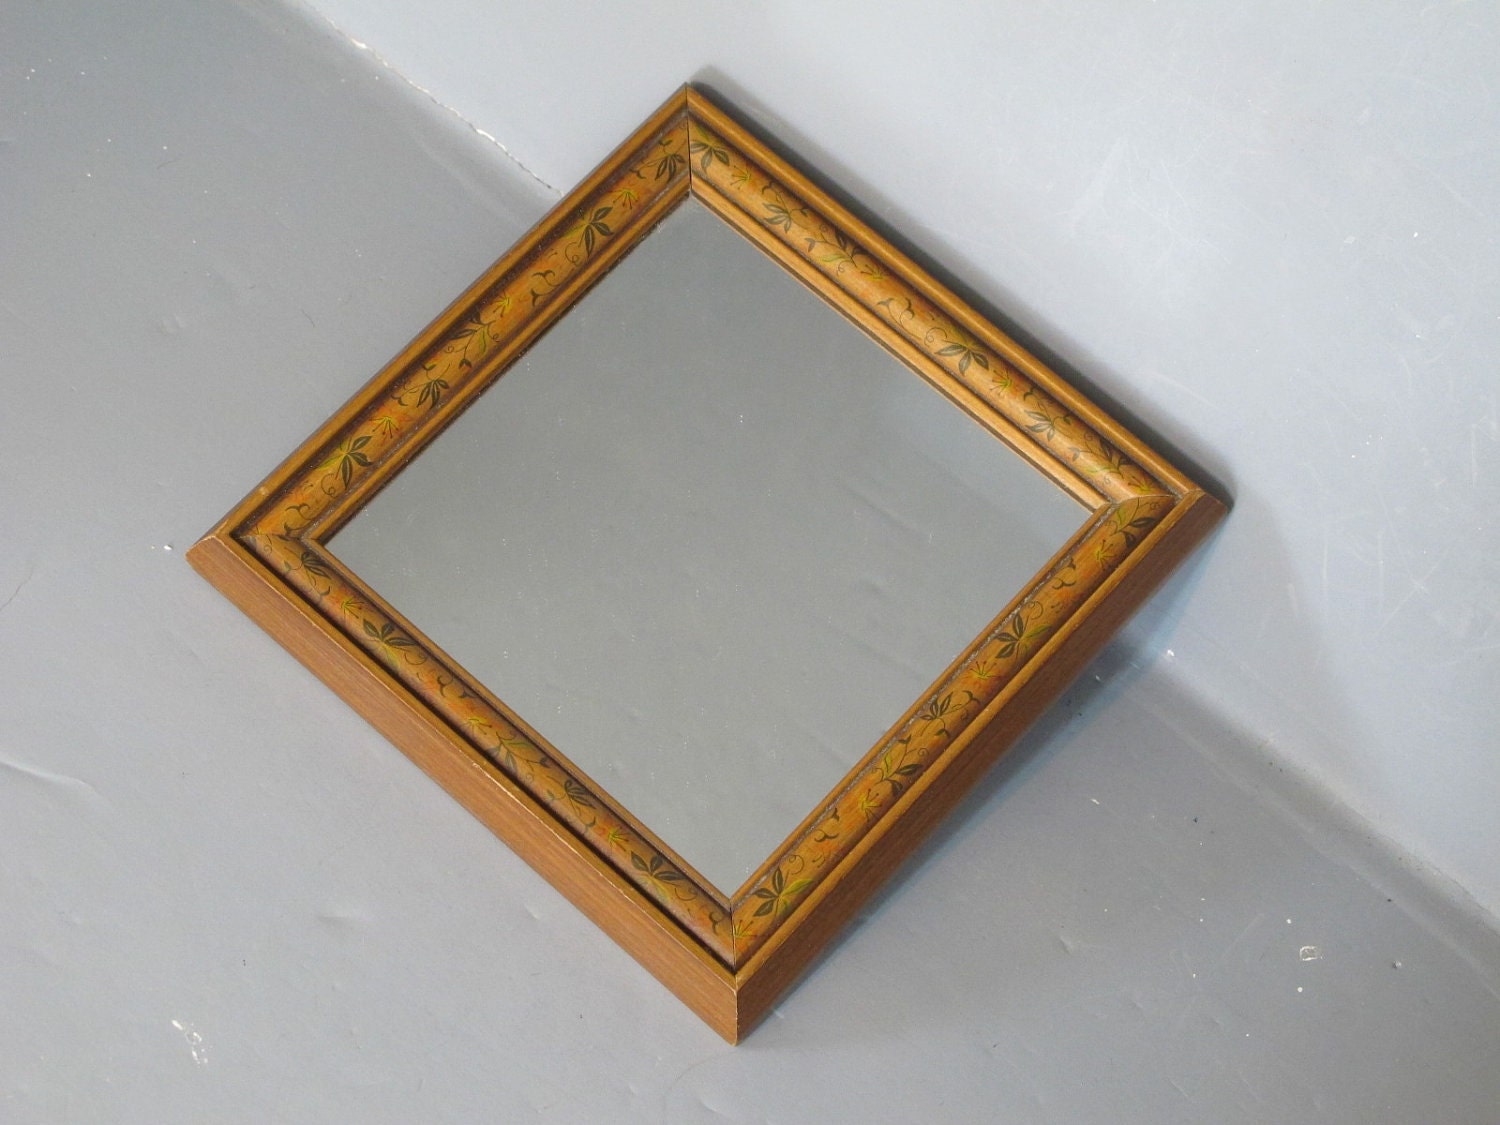 Small Vintage Mirrors